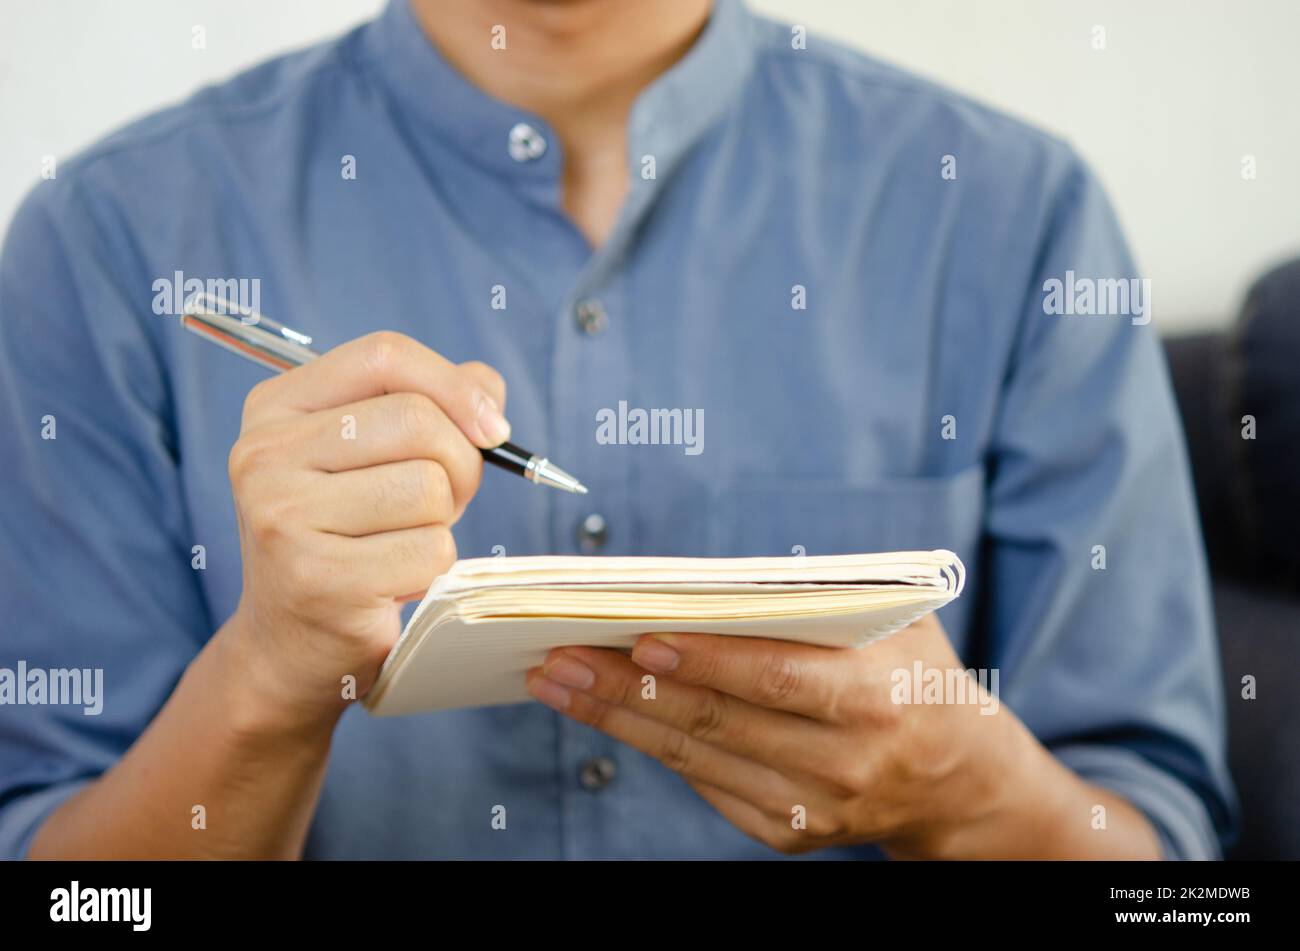 Businessman holding a pen and a notebook to take notes and plan ideas. Stock Photo